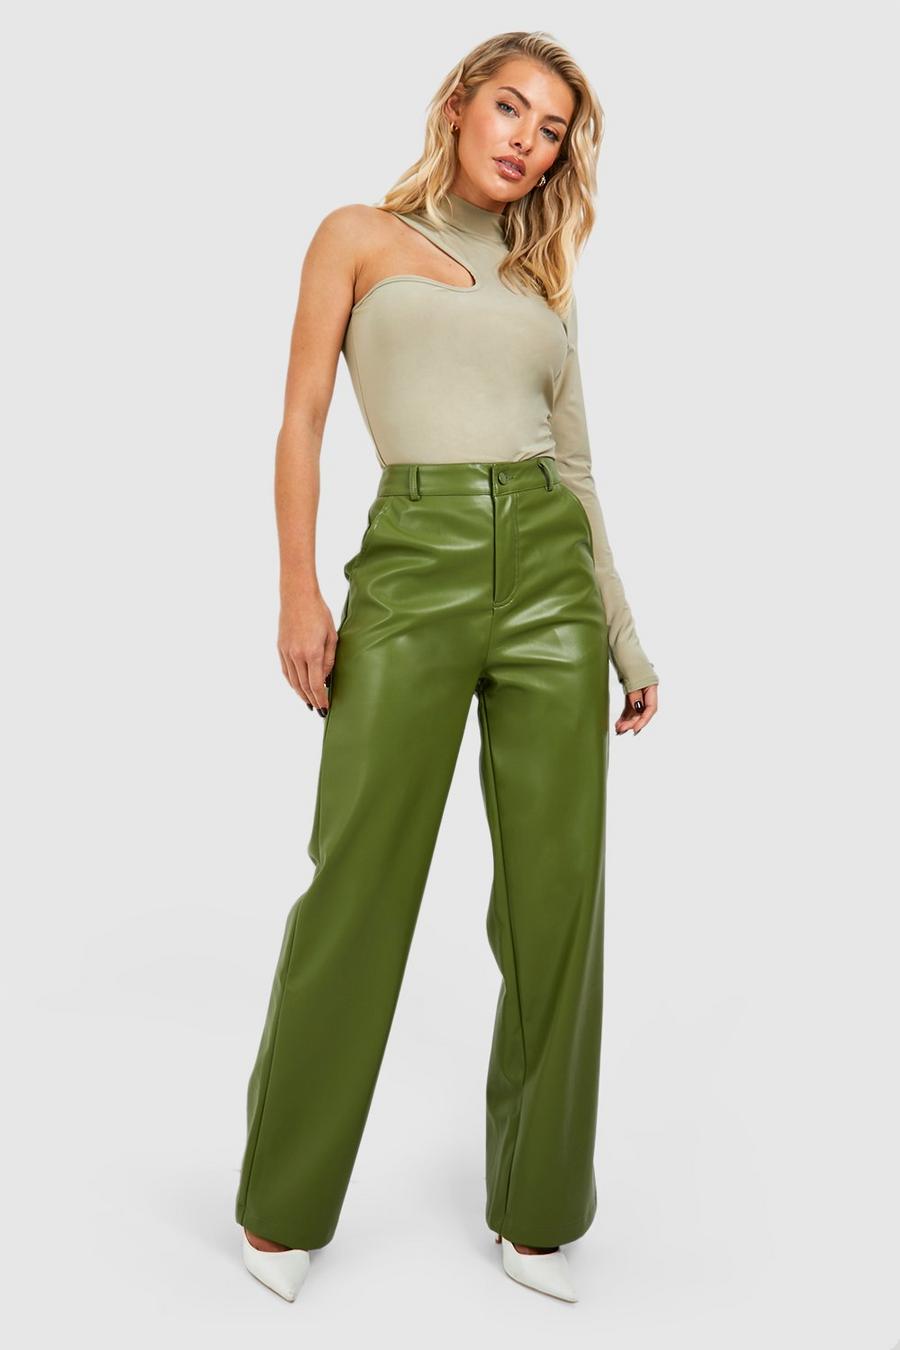 Khaki Faux Leather Relaxed Fit Straight Leg Pants